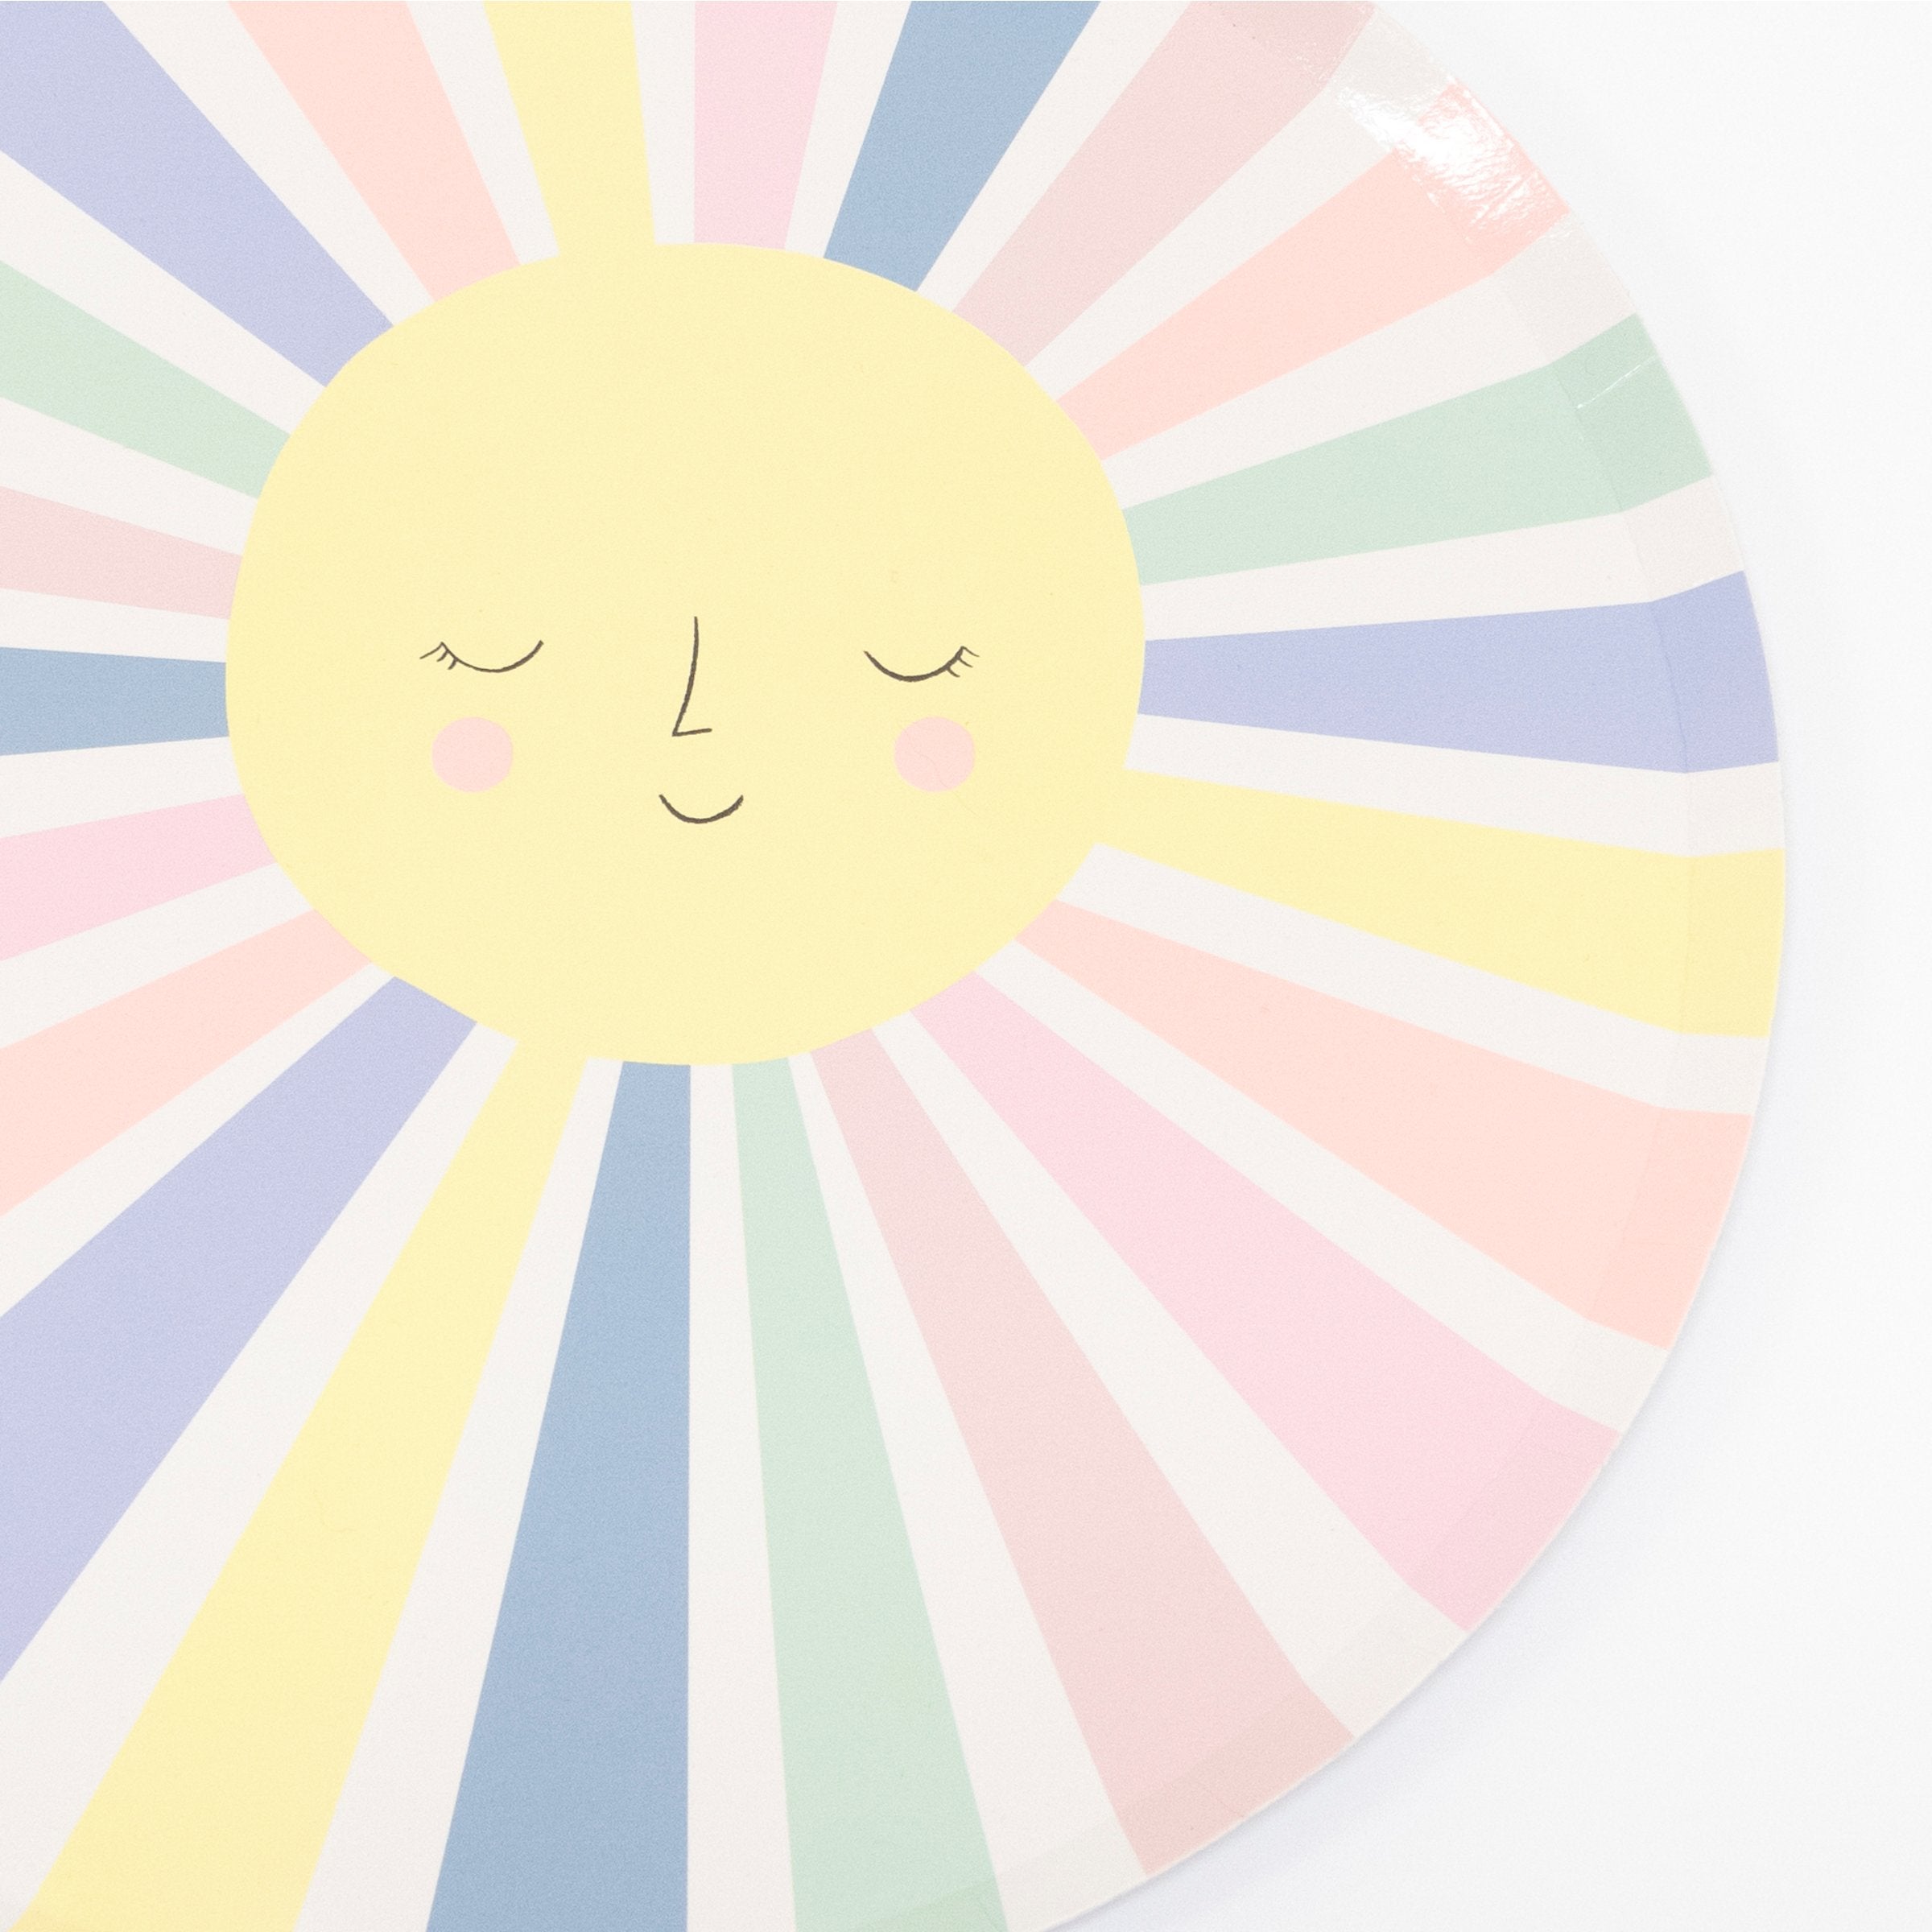 Fill your party with joy and cheer with these colorful smiling sun party plates.